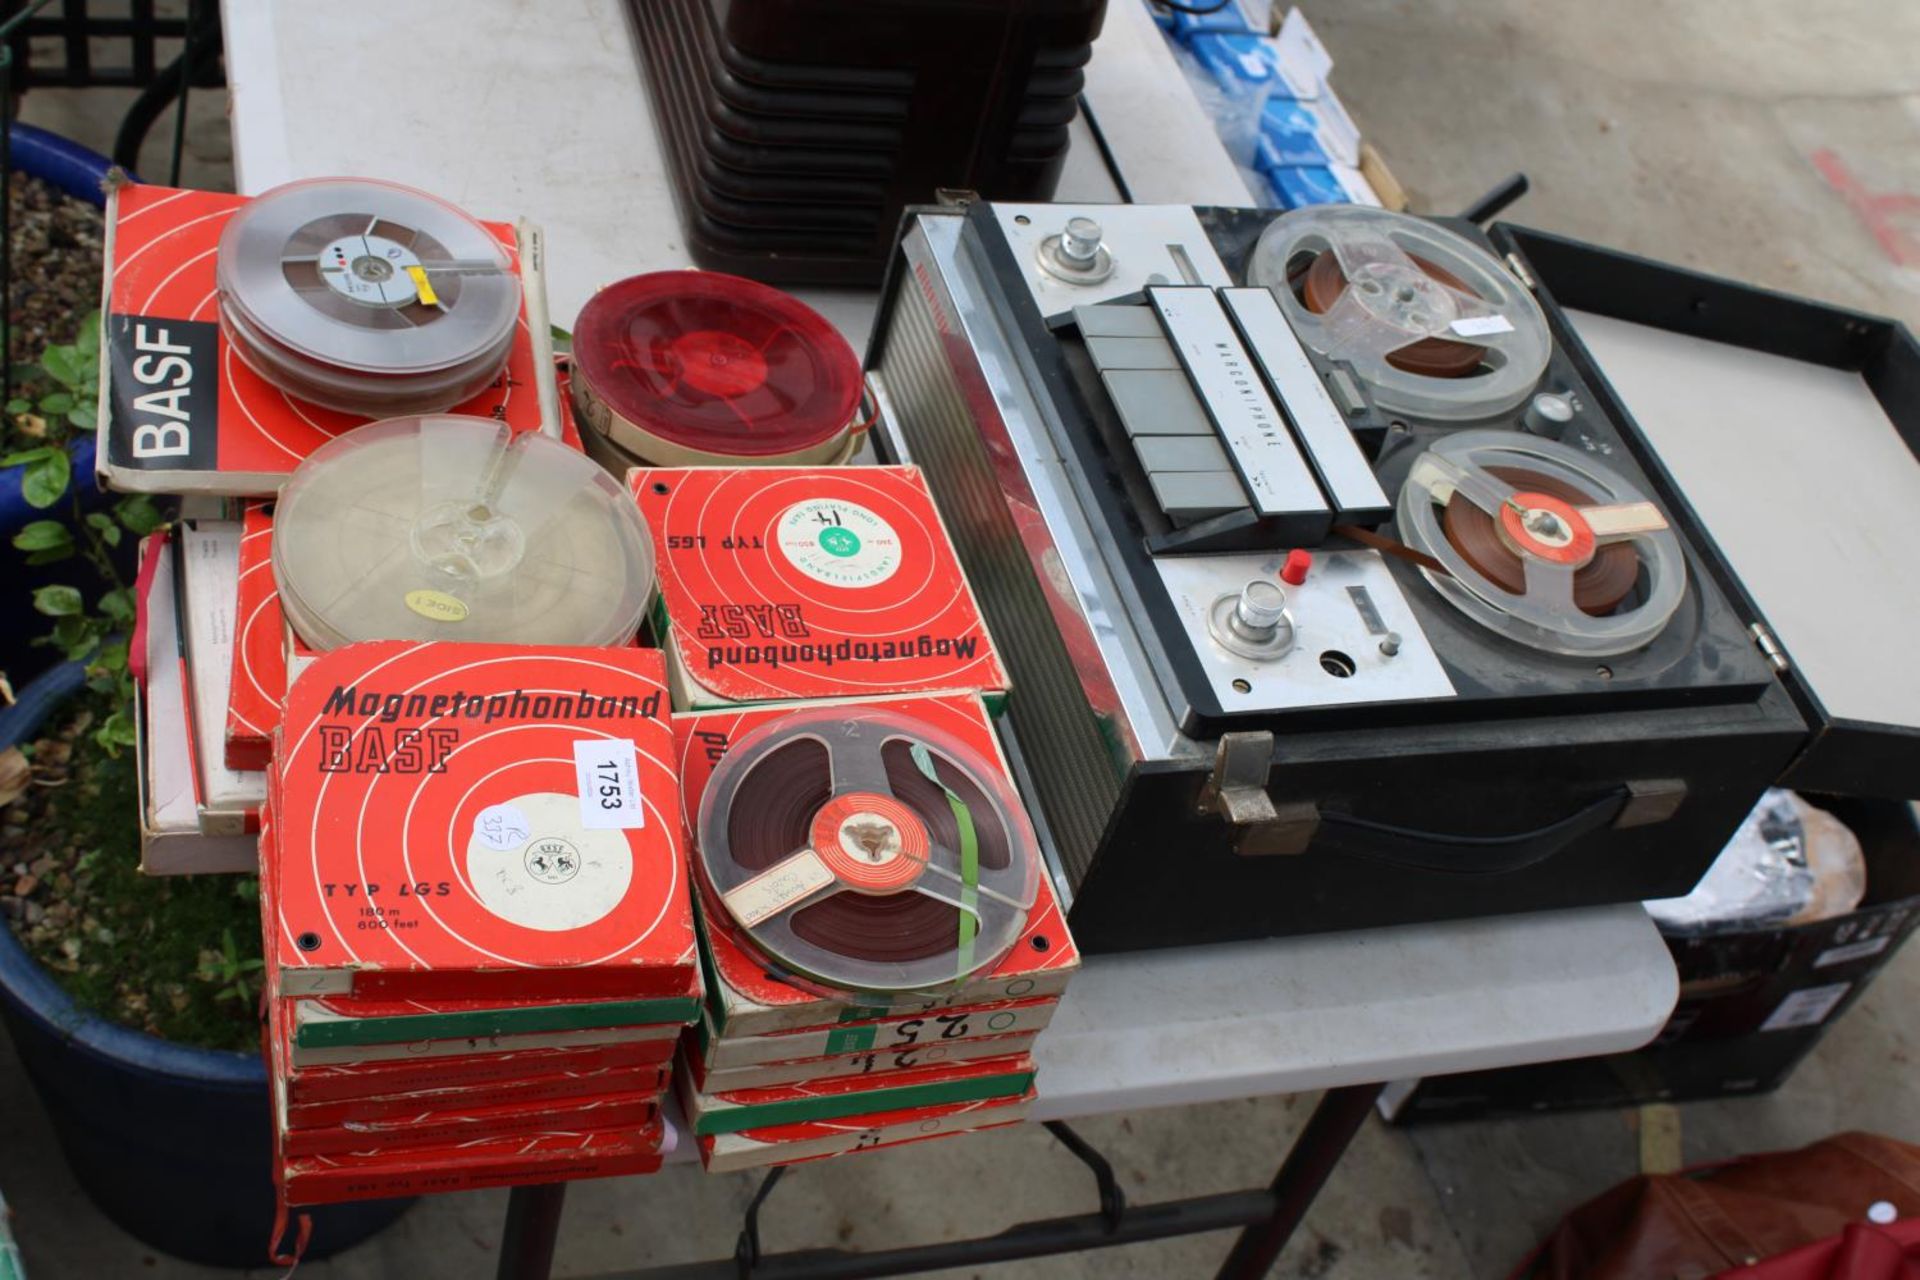 A MARCONIPHONE TAPE TO TAPE PLAYER AND AN ASSORTMENT OF REELS - Image 2 of 2